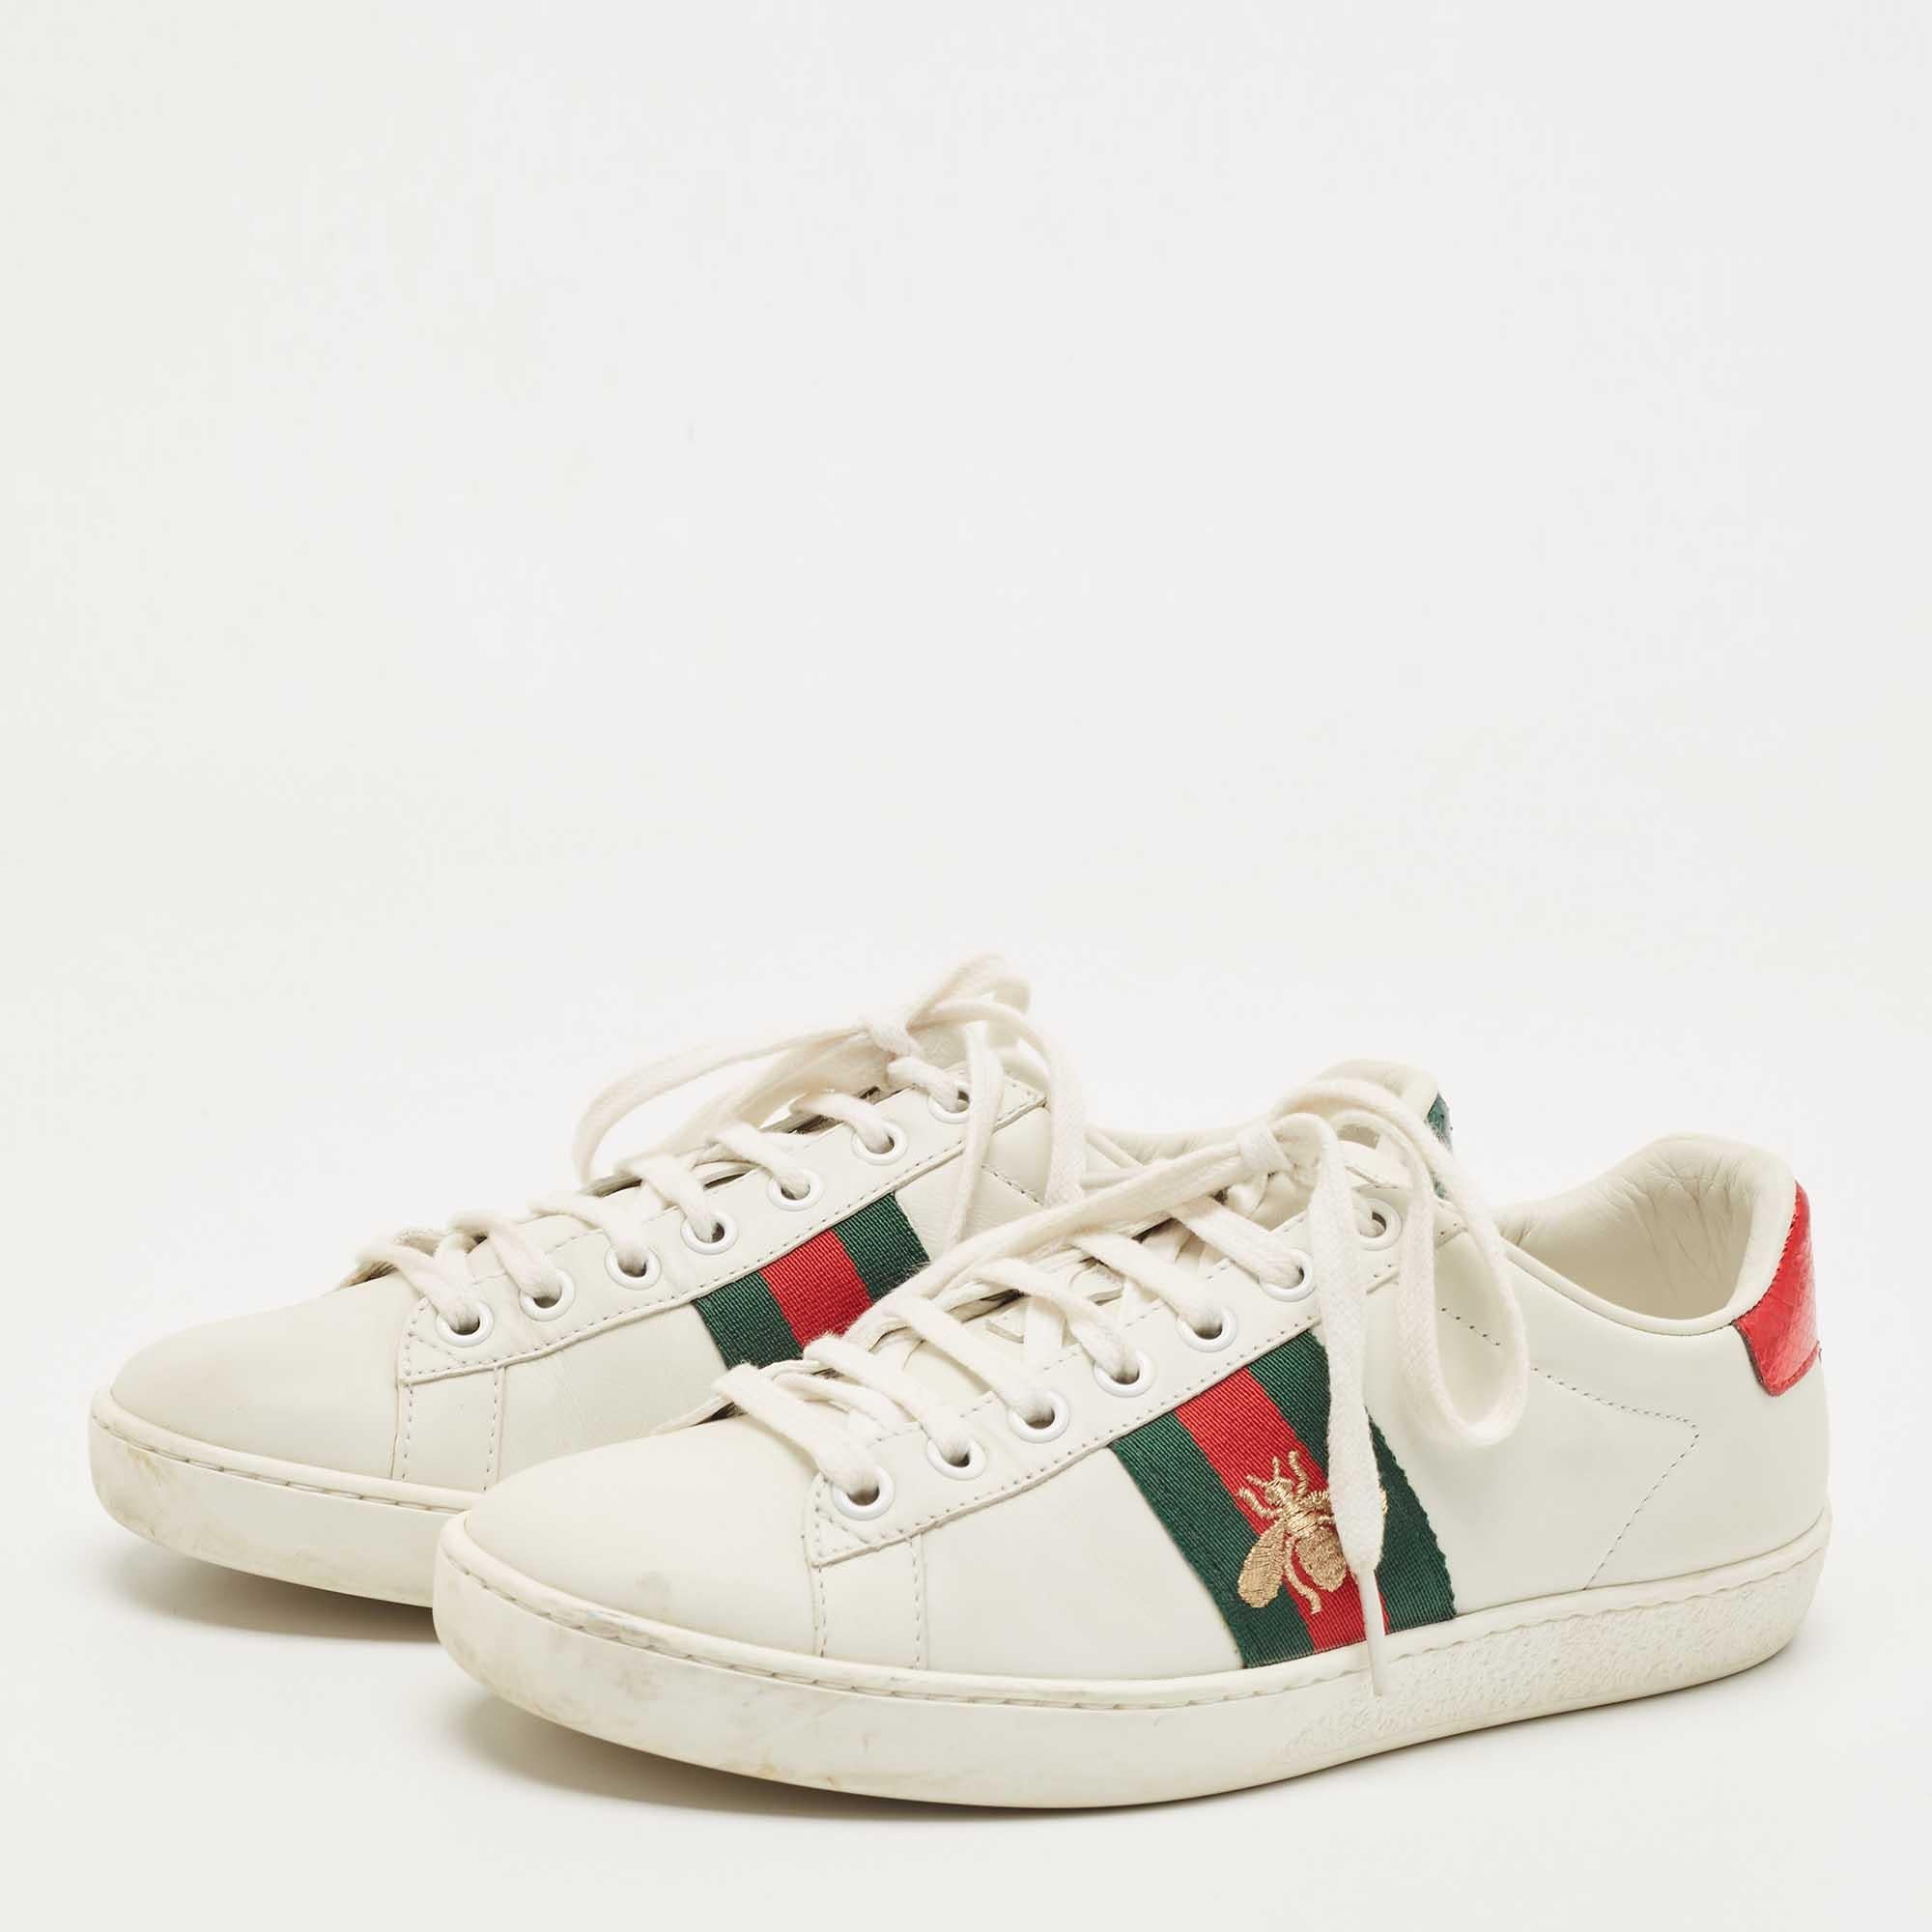 Elevate your footwear game with these Gucci sneakers. Combining high-end aesthetics and unmatched comfort, these sneakers are a symbol of modern luxury and impeccable taste.

